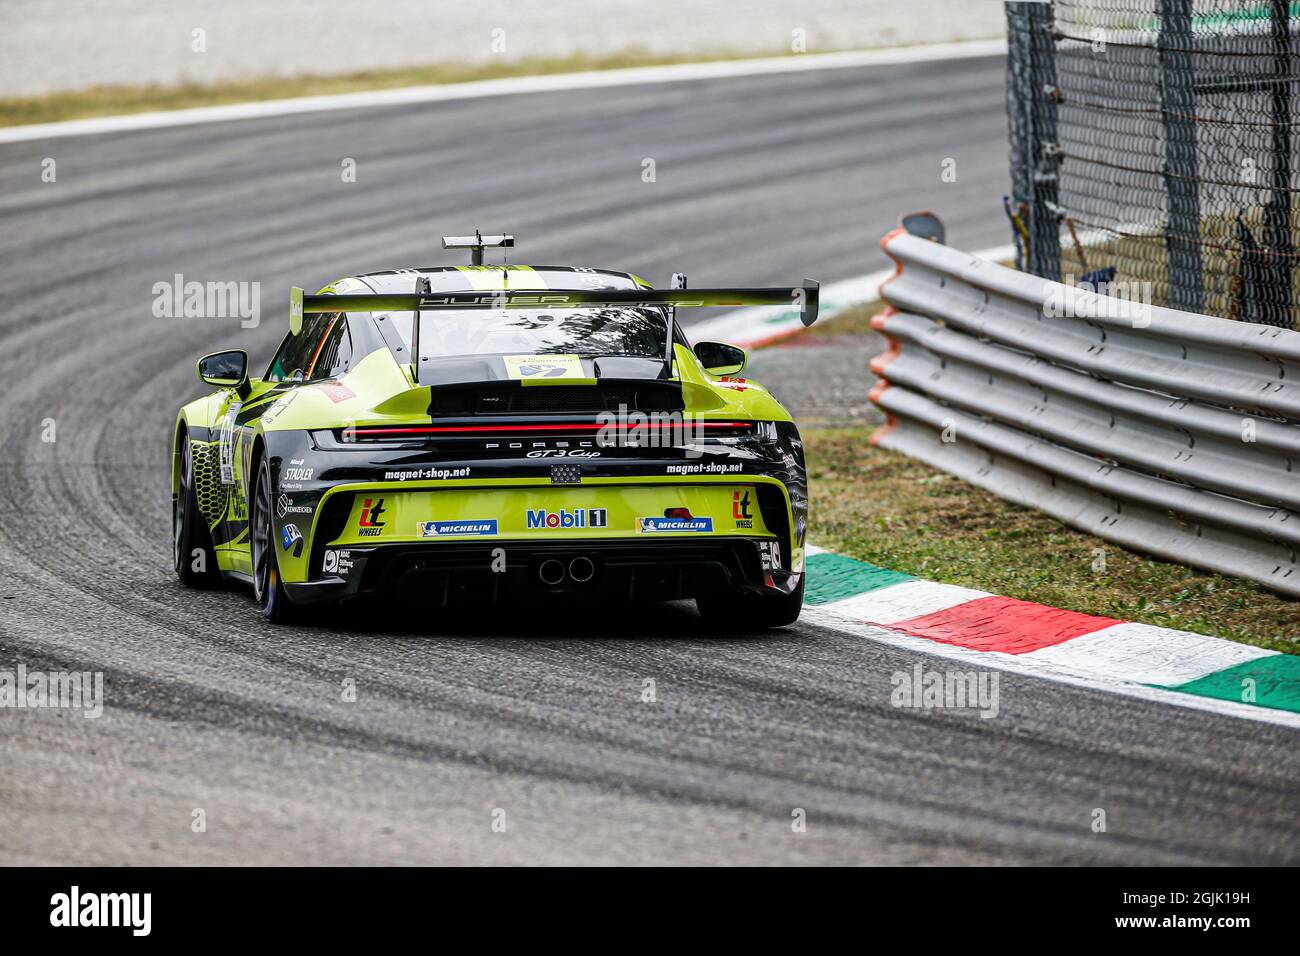 Monza, Italy. 10th Sep, 2021. # 29 Laurin Heinrich (D, Nebulus Racing by Huber), Porsche Mobil 1 Supercup at Autodromo Nazionale Monza on September 10, 2021 in Monza, Italy. (Photo by HOCH ZWEI) Credit: dpa/Alamy Live News Stock Photo